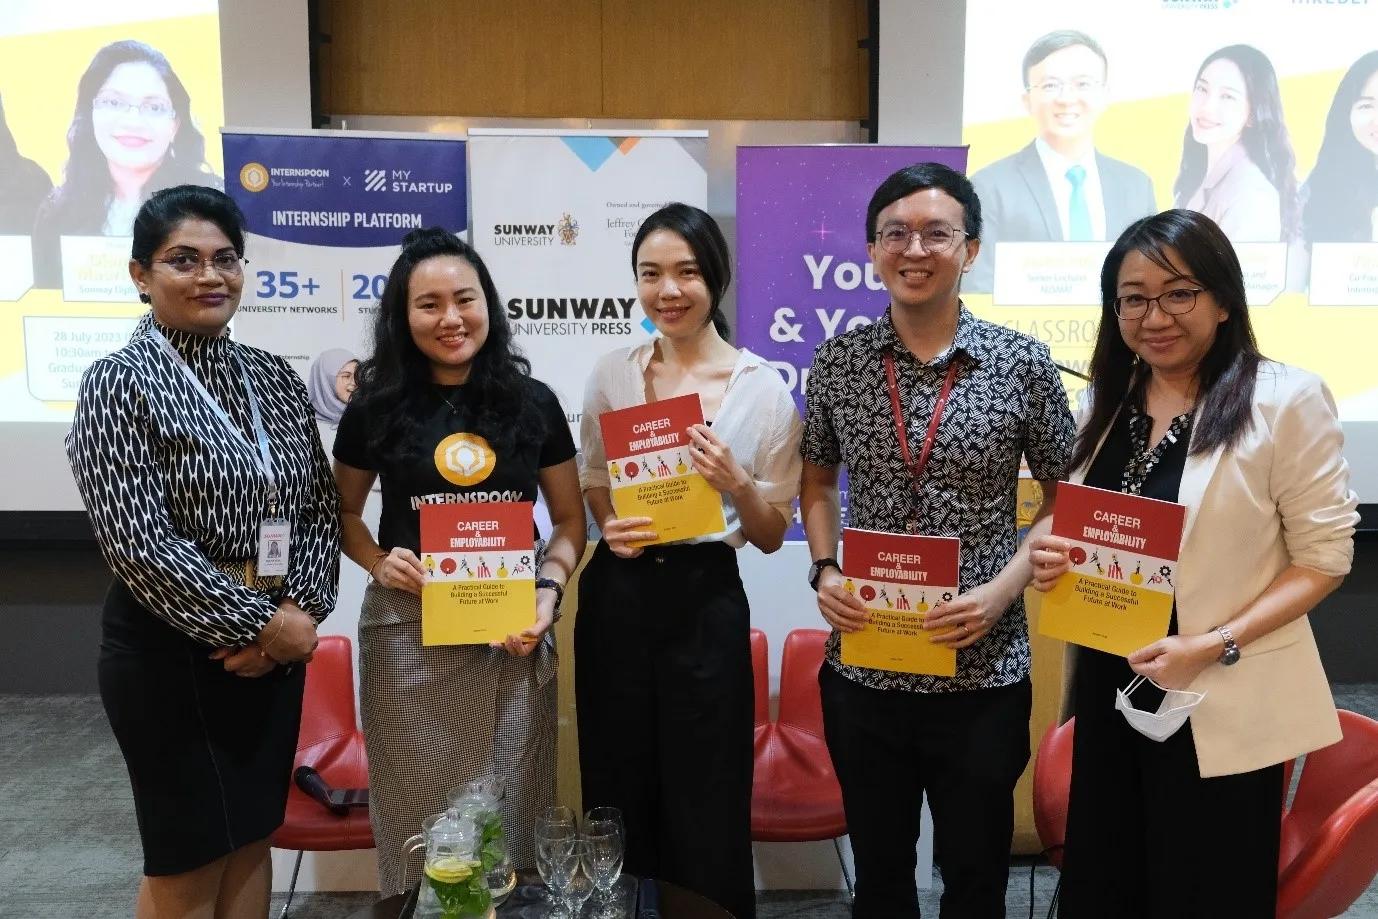 From left to right: Ms Diana Gail Maurice, Ms Yinxie Chew, Ms Joselyn Lau and Mr Jason Soh, with Ms Carol Wong, Head of Sunway University Press